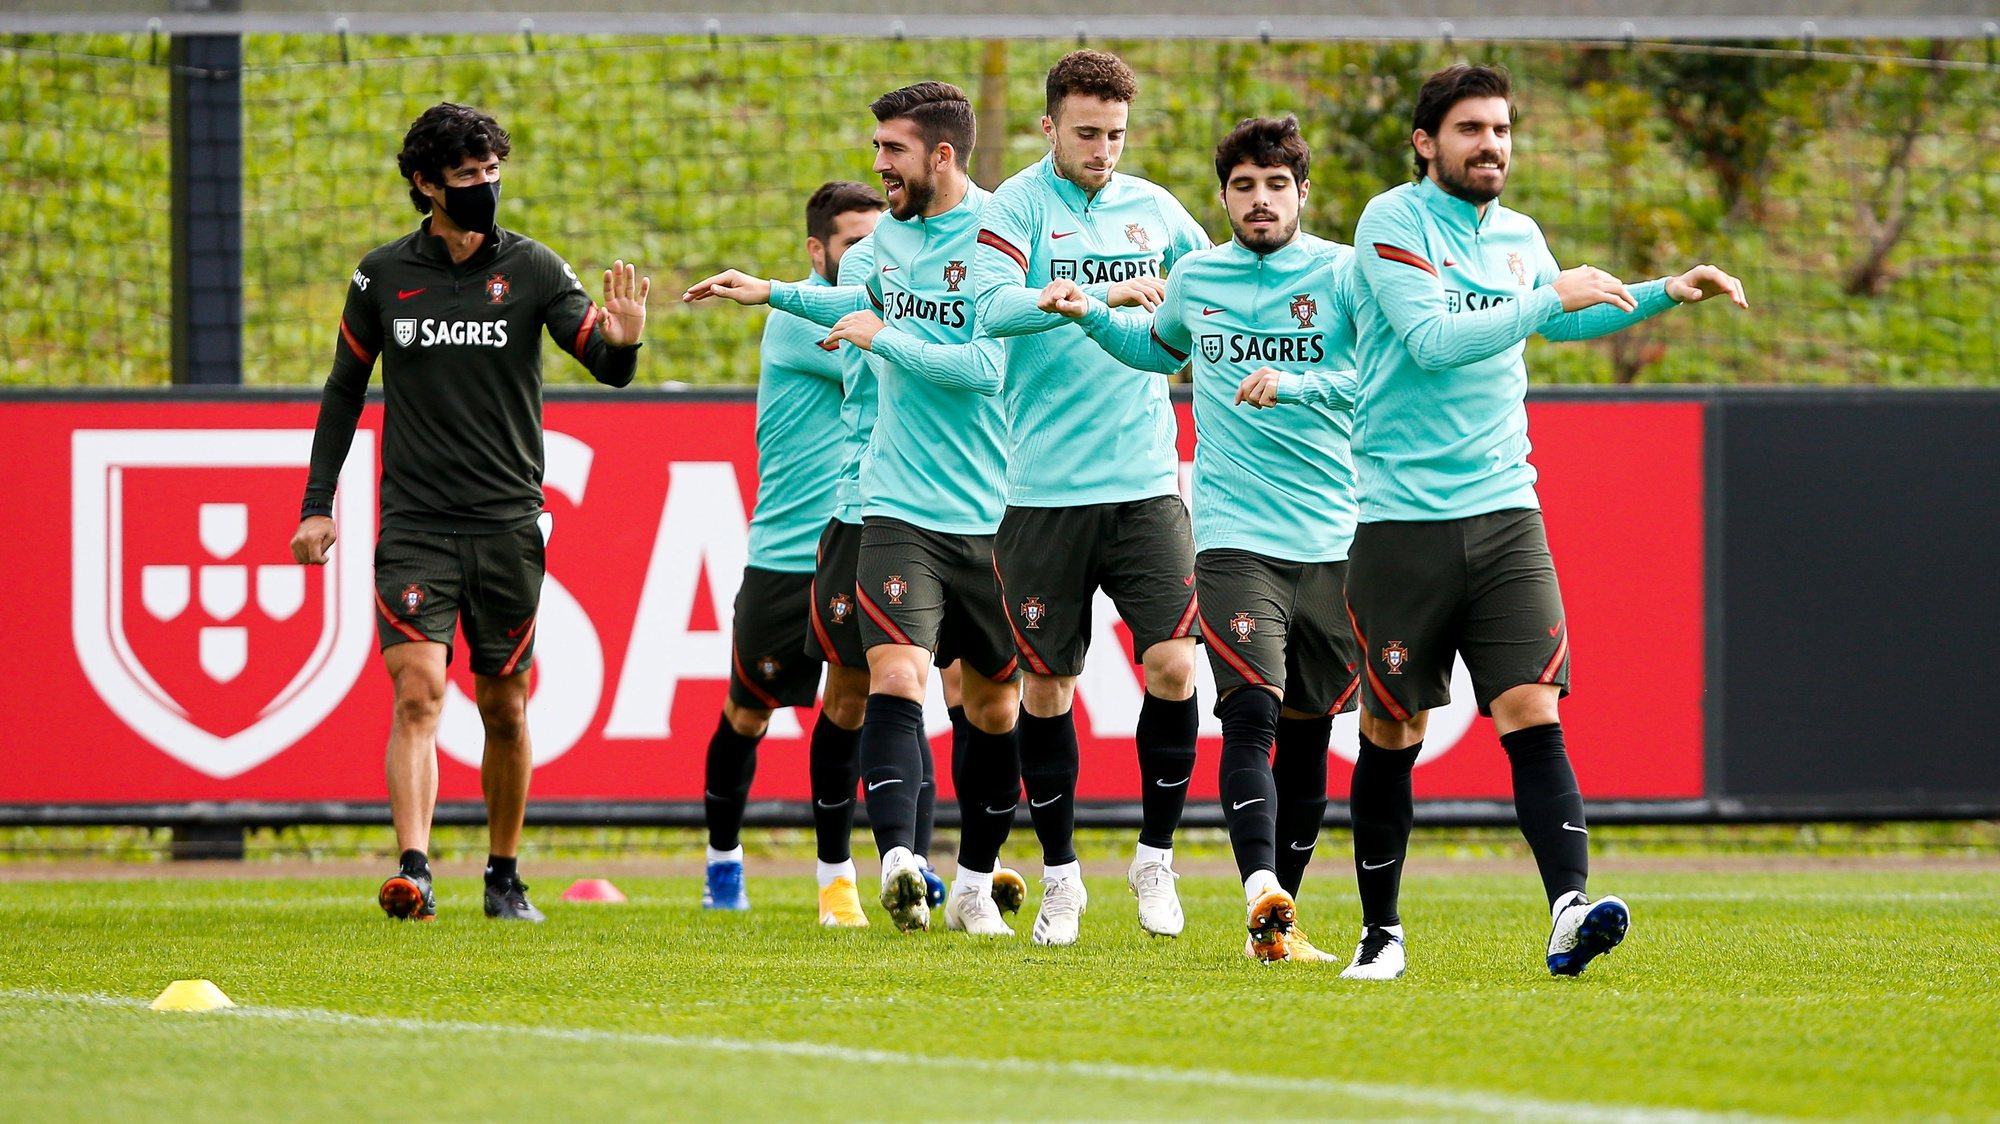 A handout photo made available by Portuguese Football Federation (FPF) shows Portugal players during a training session for the upcoming match with Croacia to be played next Tuesdayy, Oeiras, Portugal, 15th November 2020. FPF/LUSA